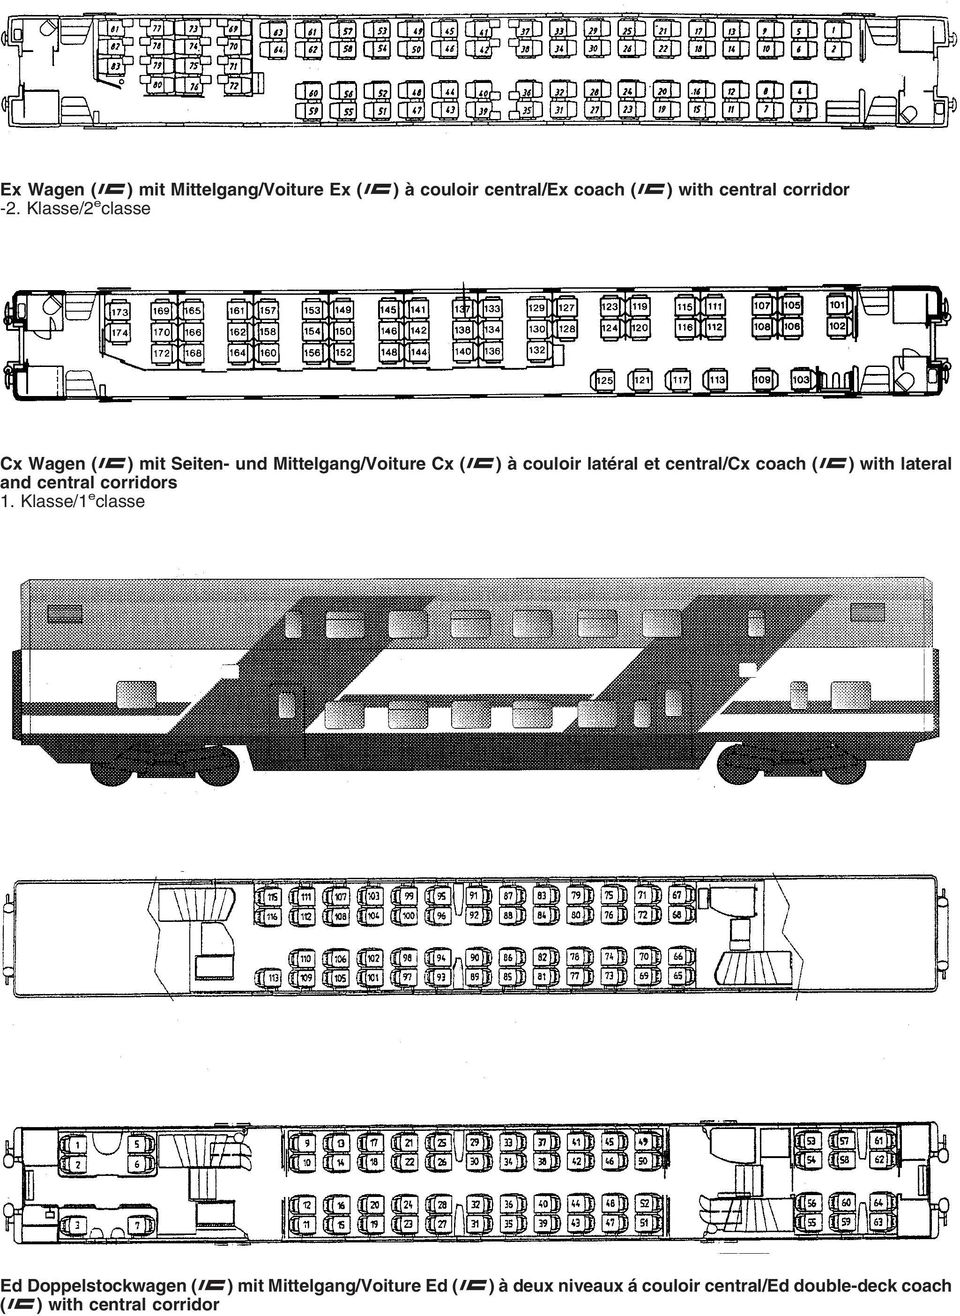 central/cx coach (c) with lateral and central corridors 1.